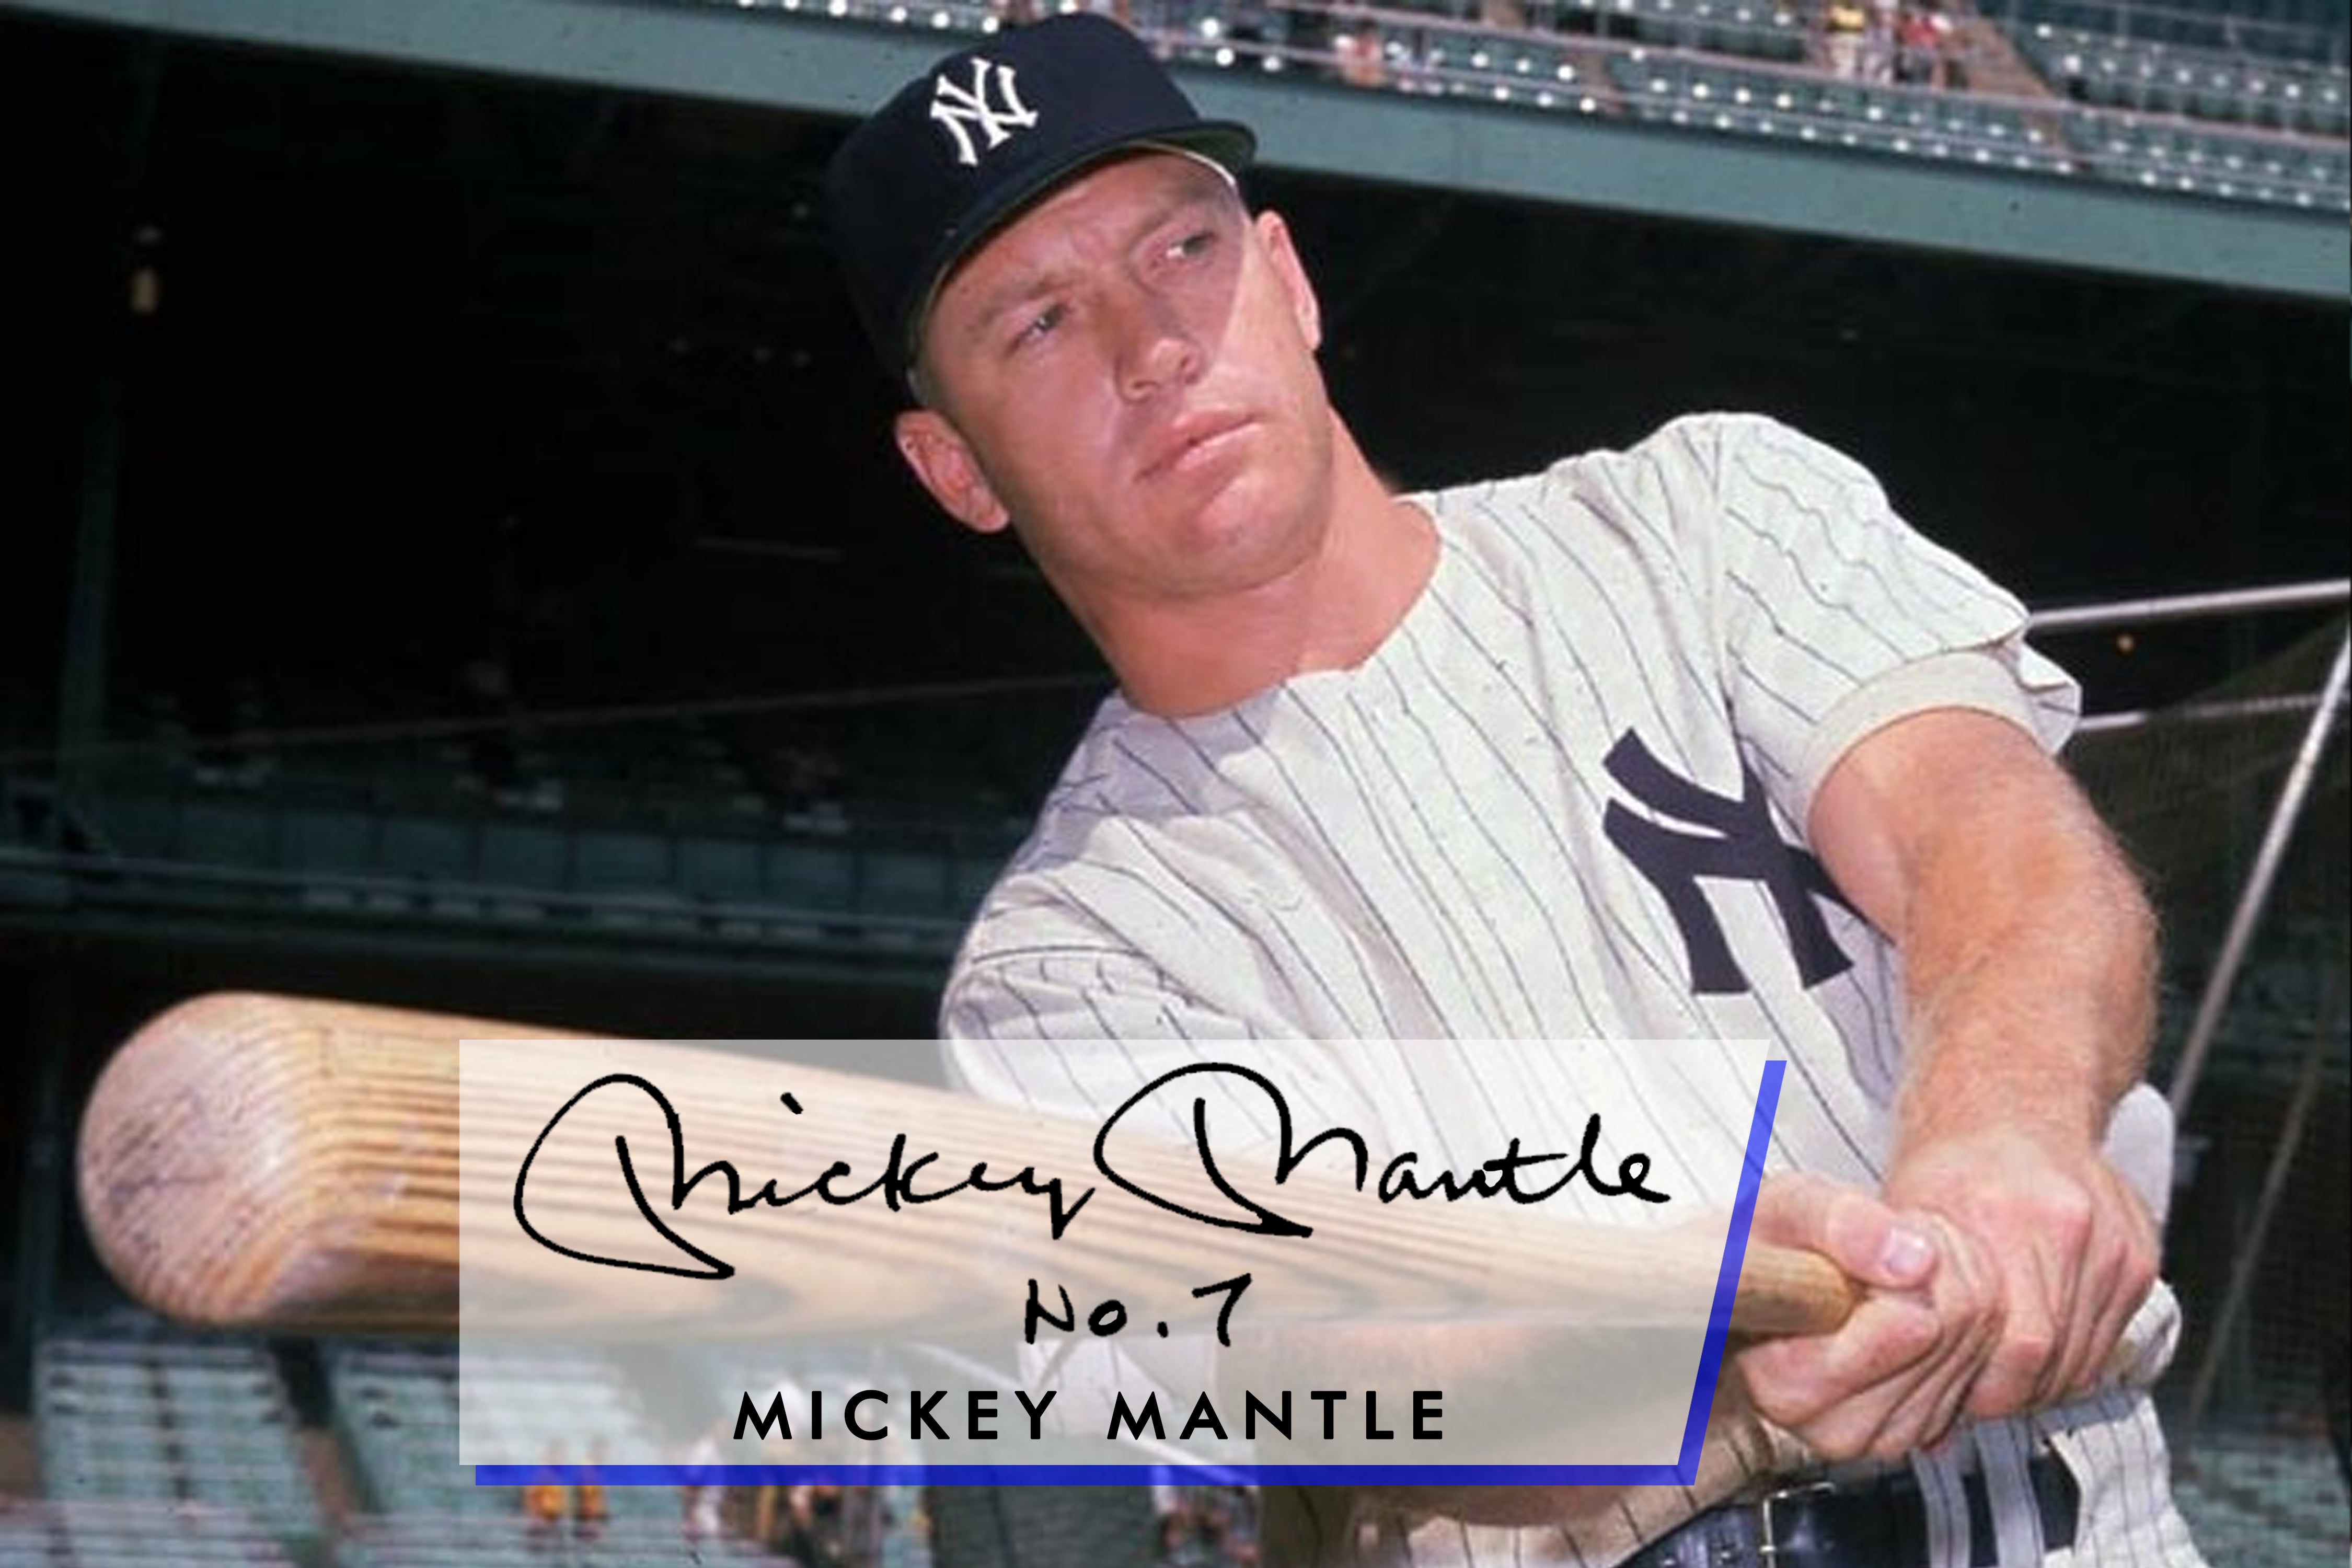  Incredible Mickey Mantle No. 6 Signed Inscribed NY